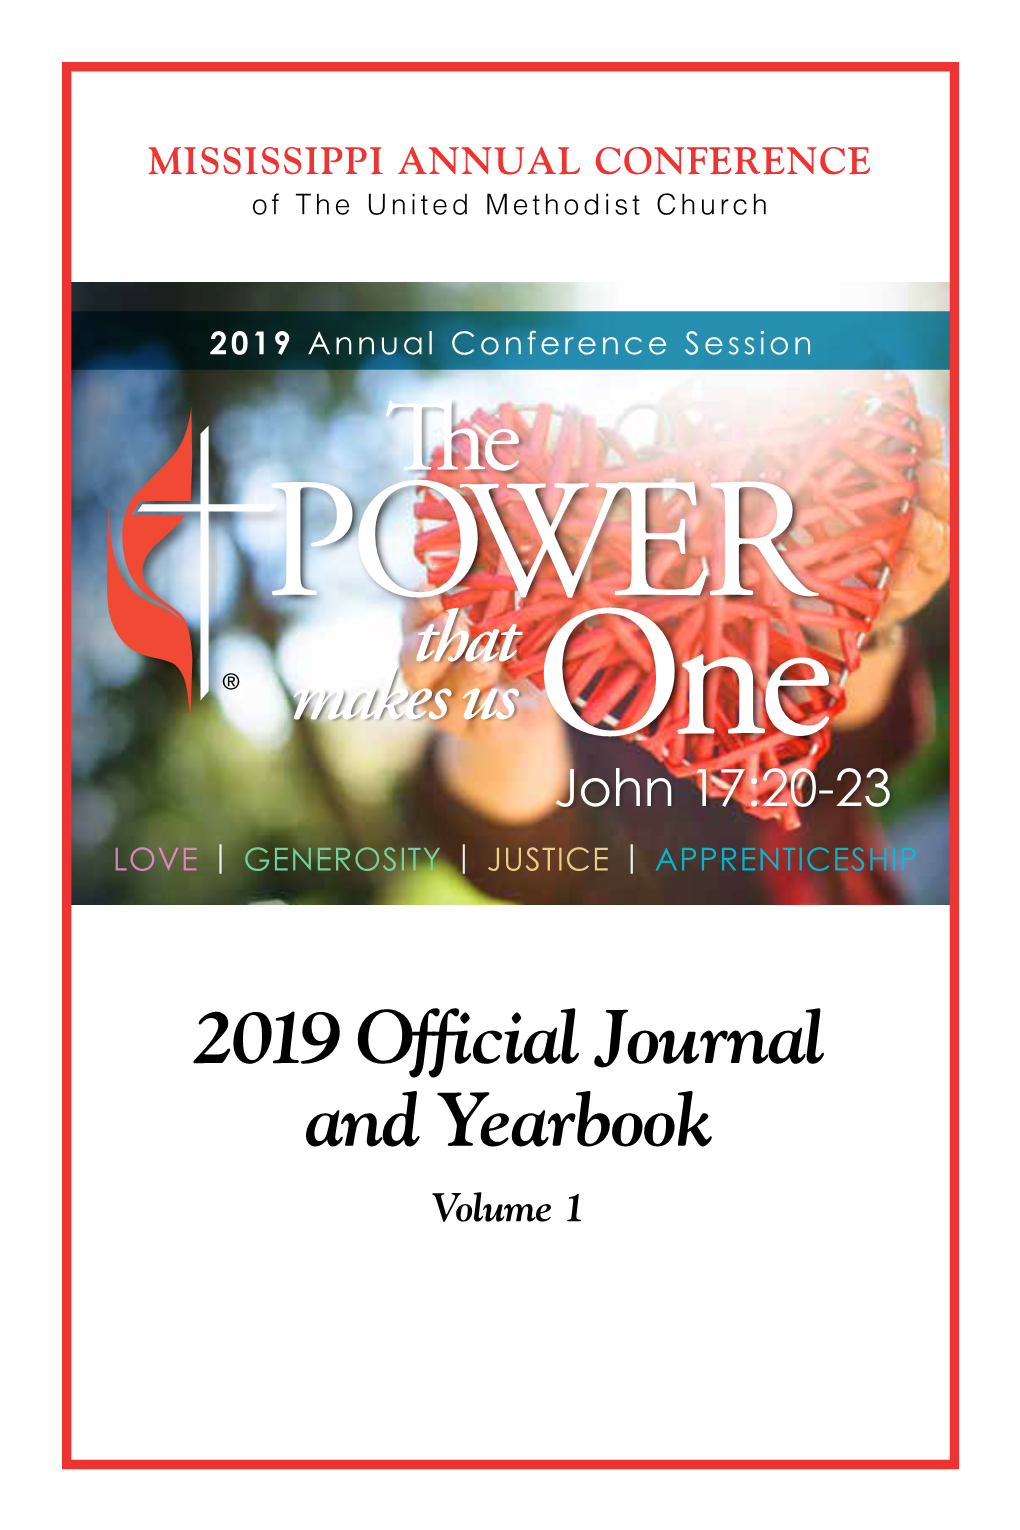 2019 Official Journal and Yearbook Volume 1